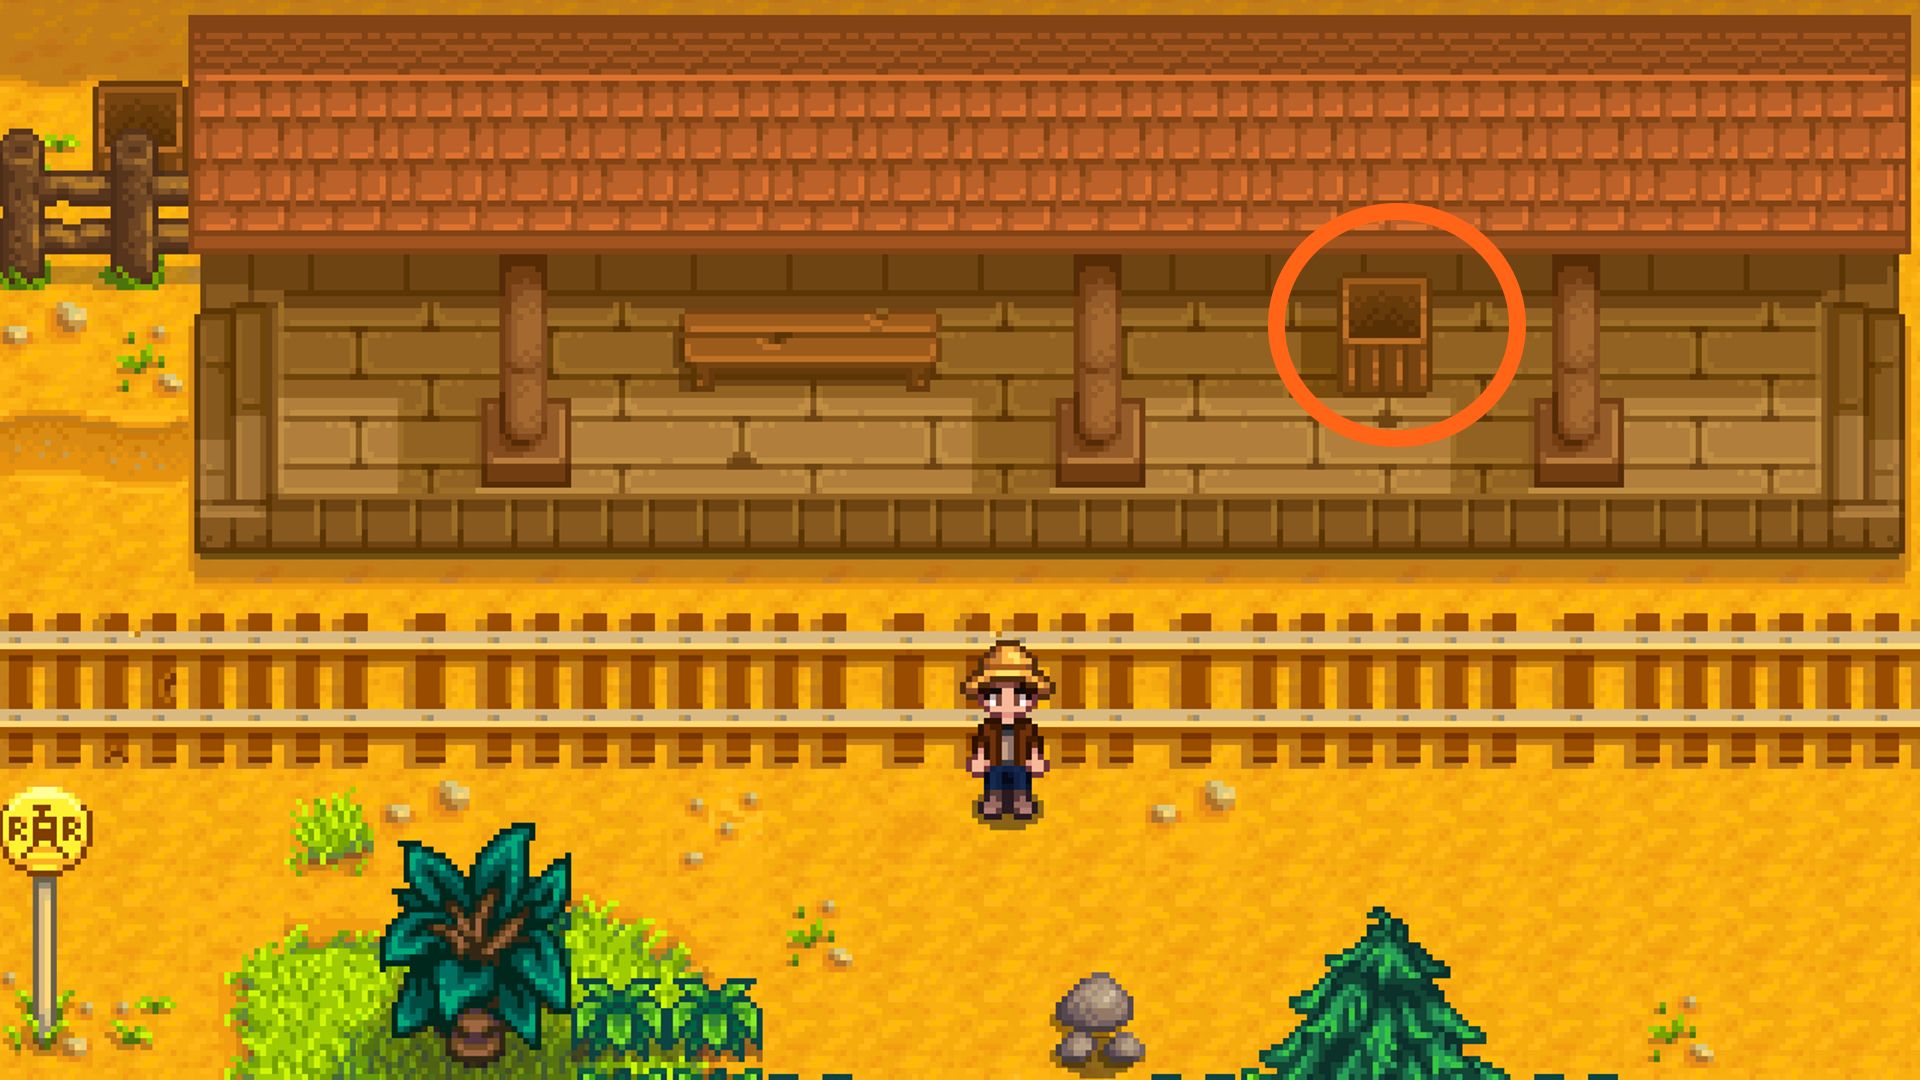 stardew valley train station box for rainbow shell